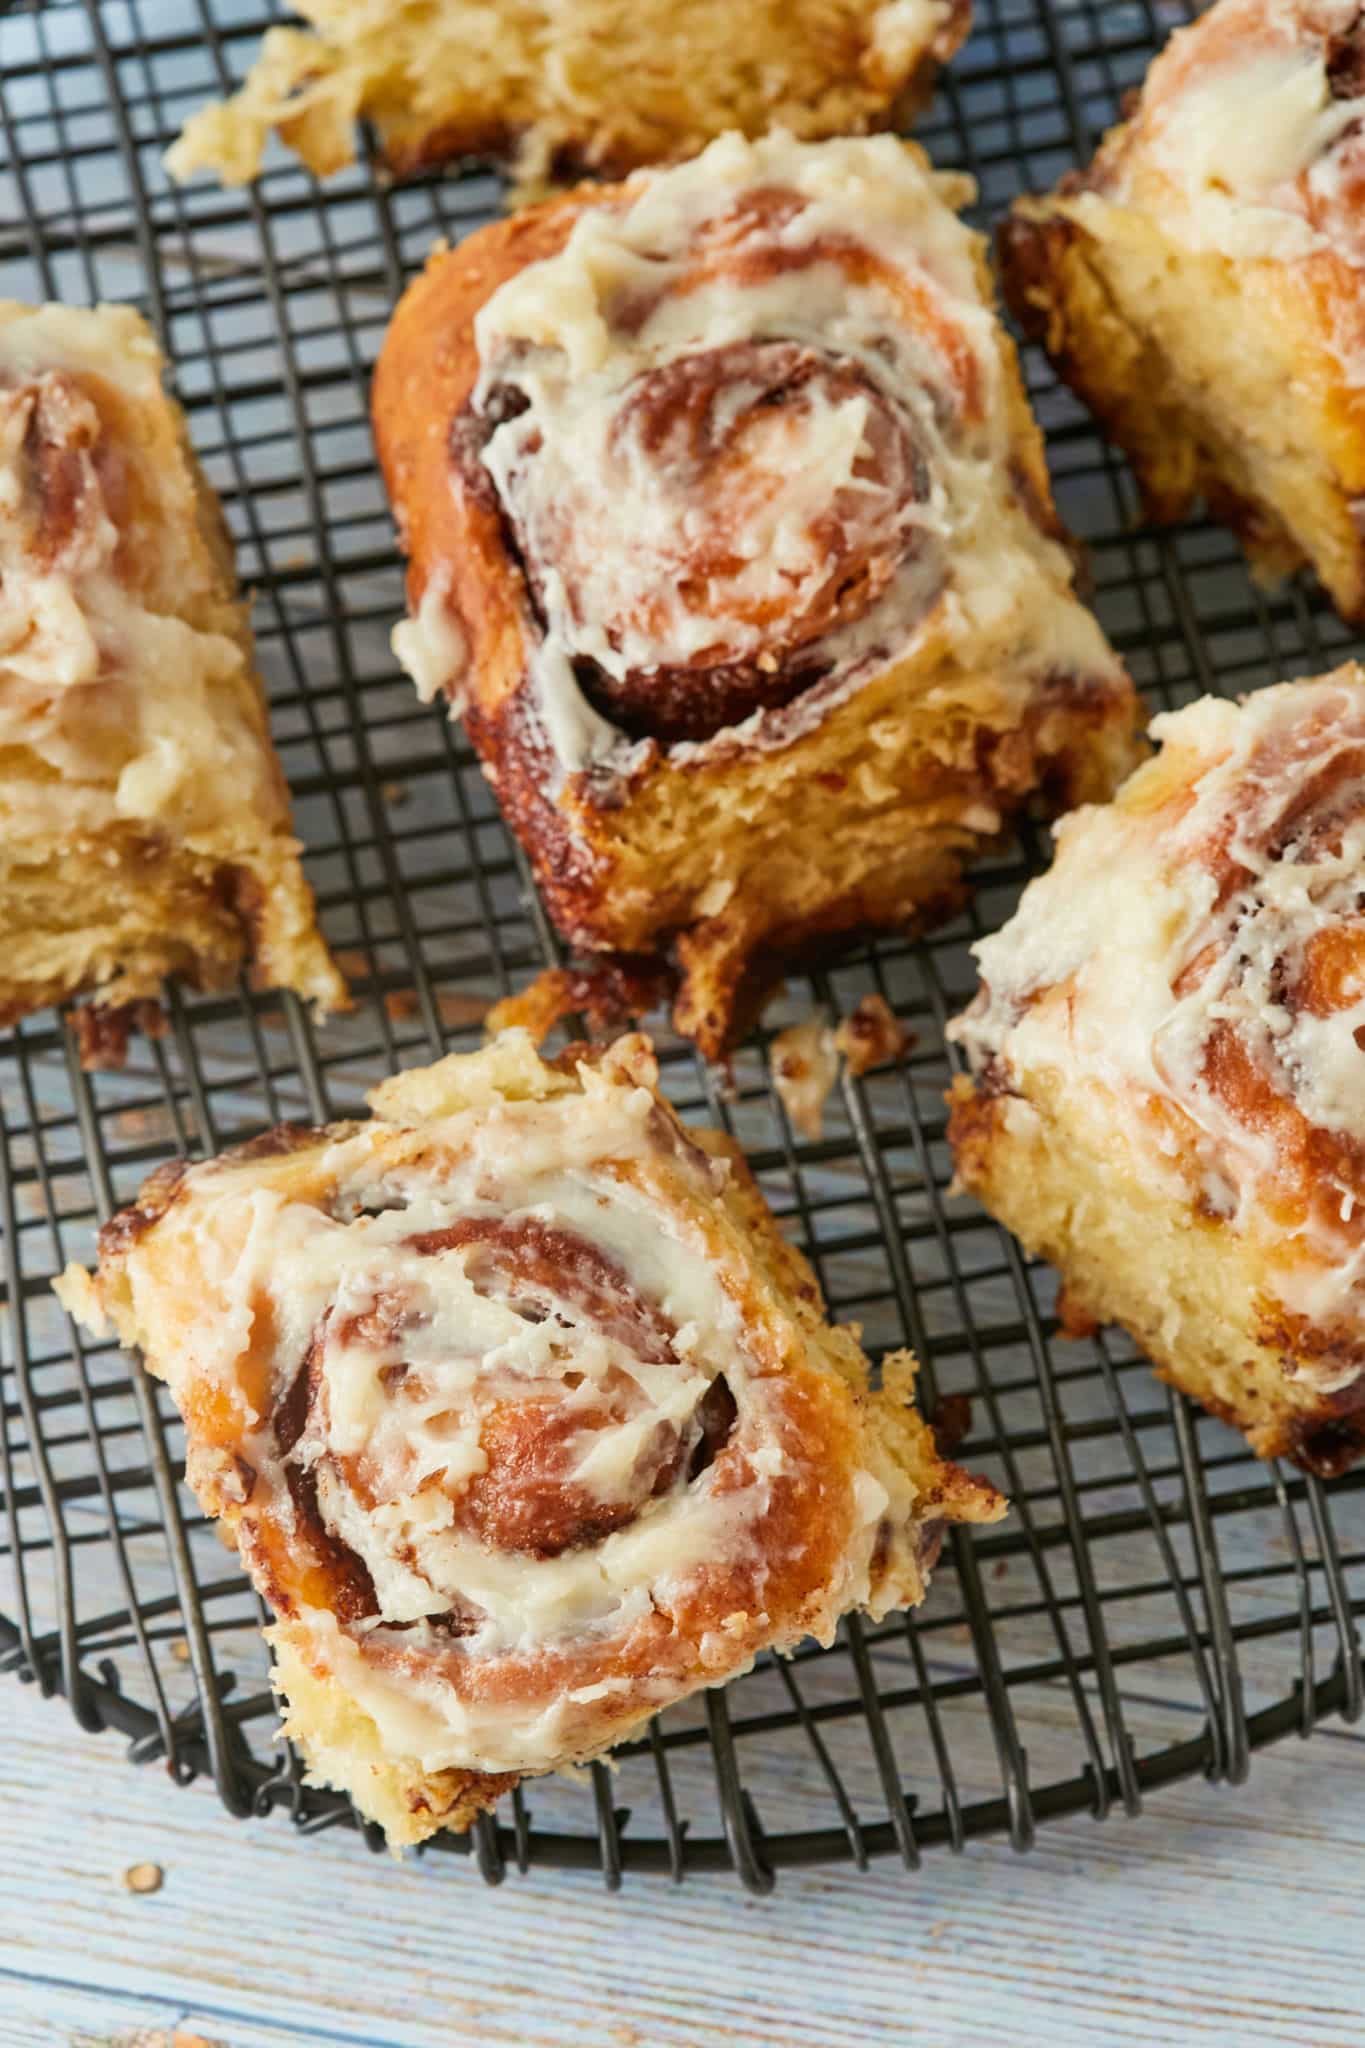 A top-down view of my best cinnamon rolls recipe, showing the frosting and texture.